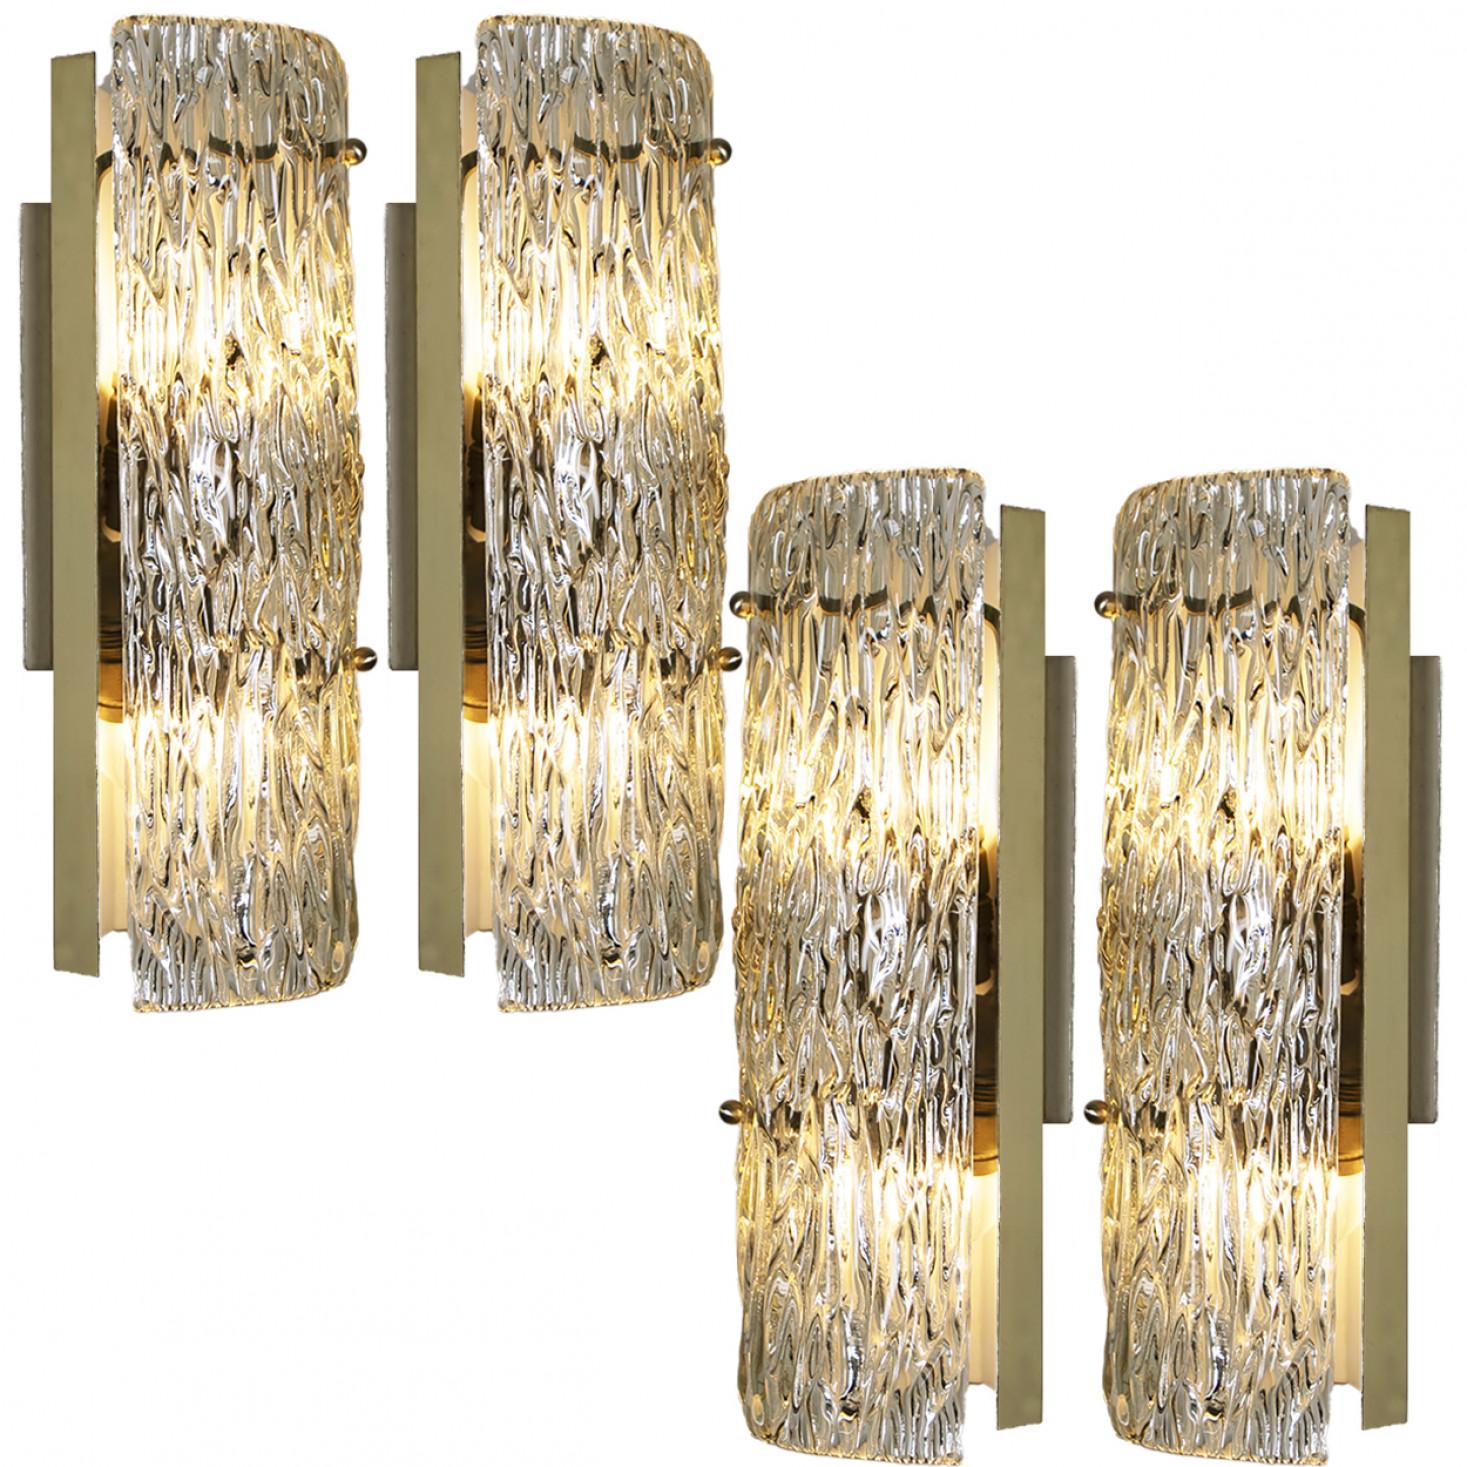 Other One of Four Large Modern Brass Ice Glass Wall Lights by J. T. Kalmar, 1960s For Sale